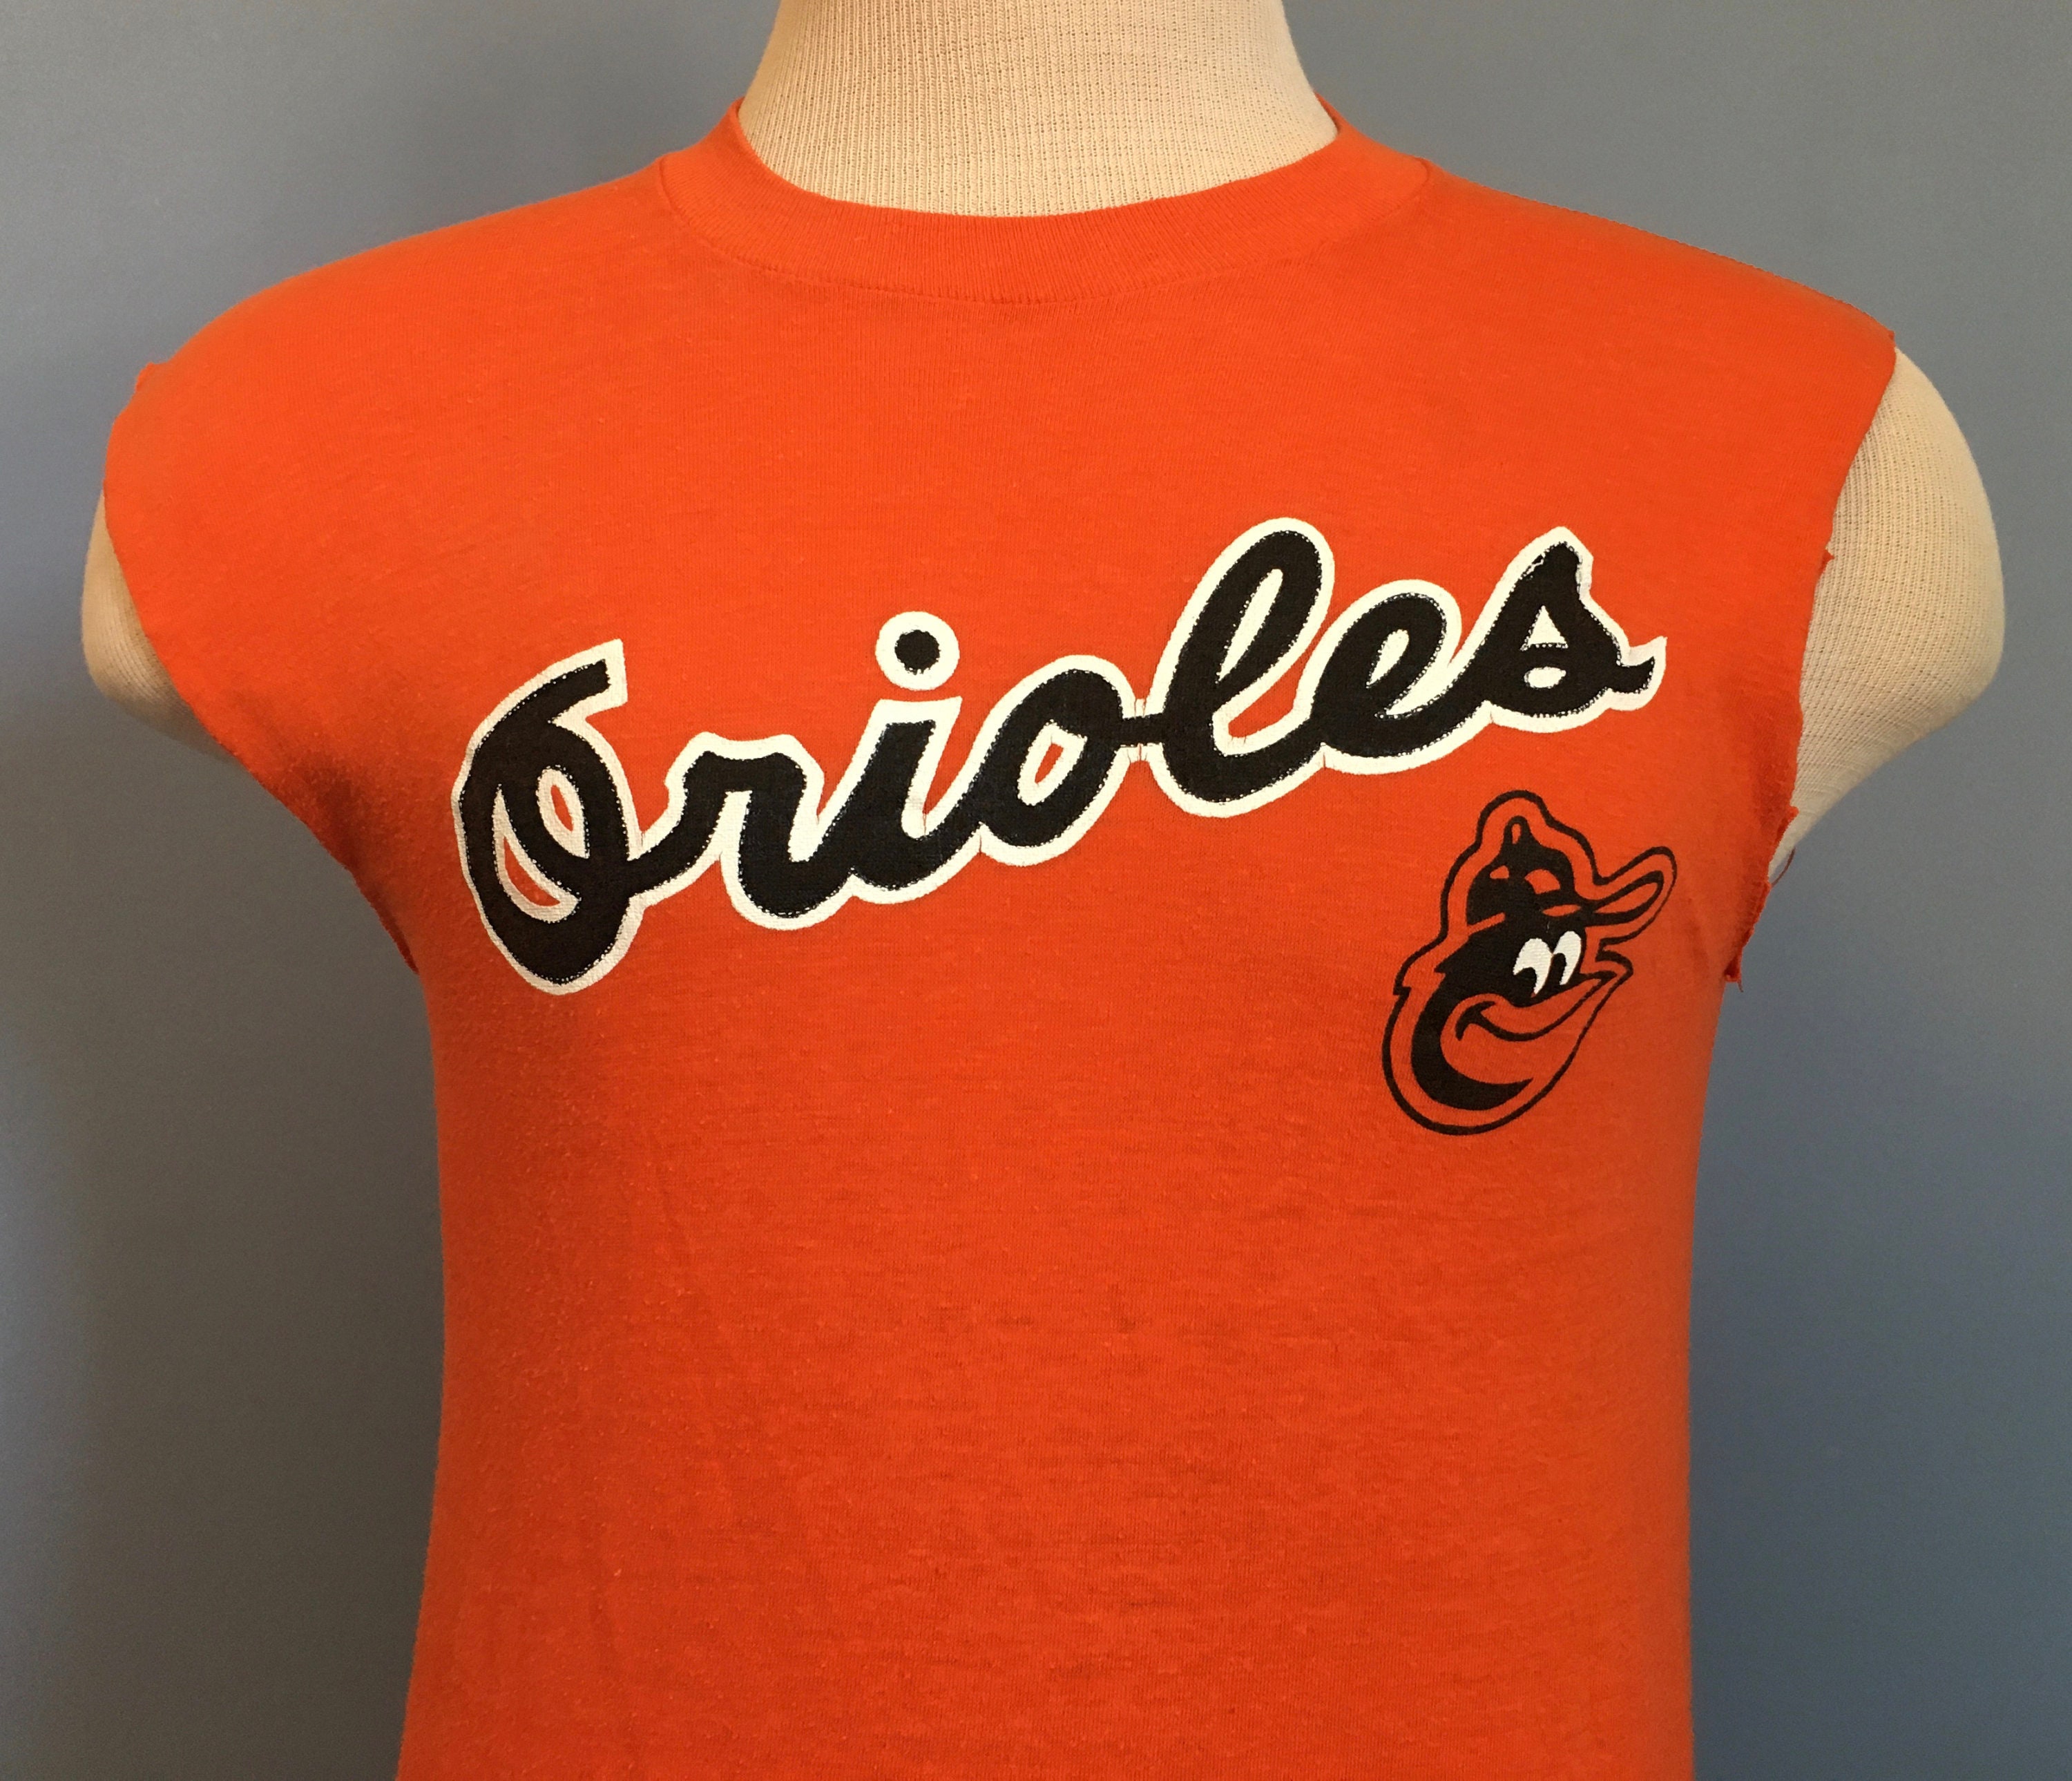 Buy Ravens Orioles Shirt Online In India -  India